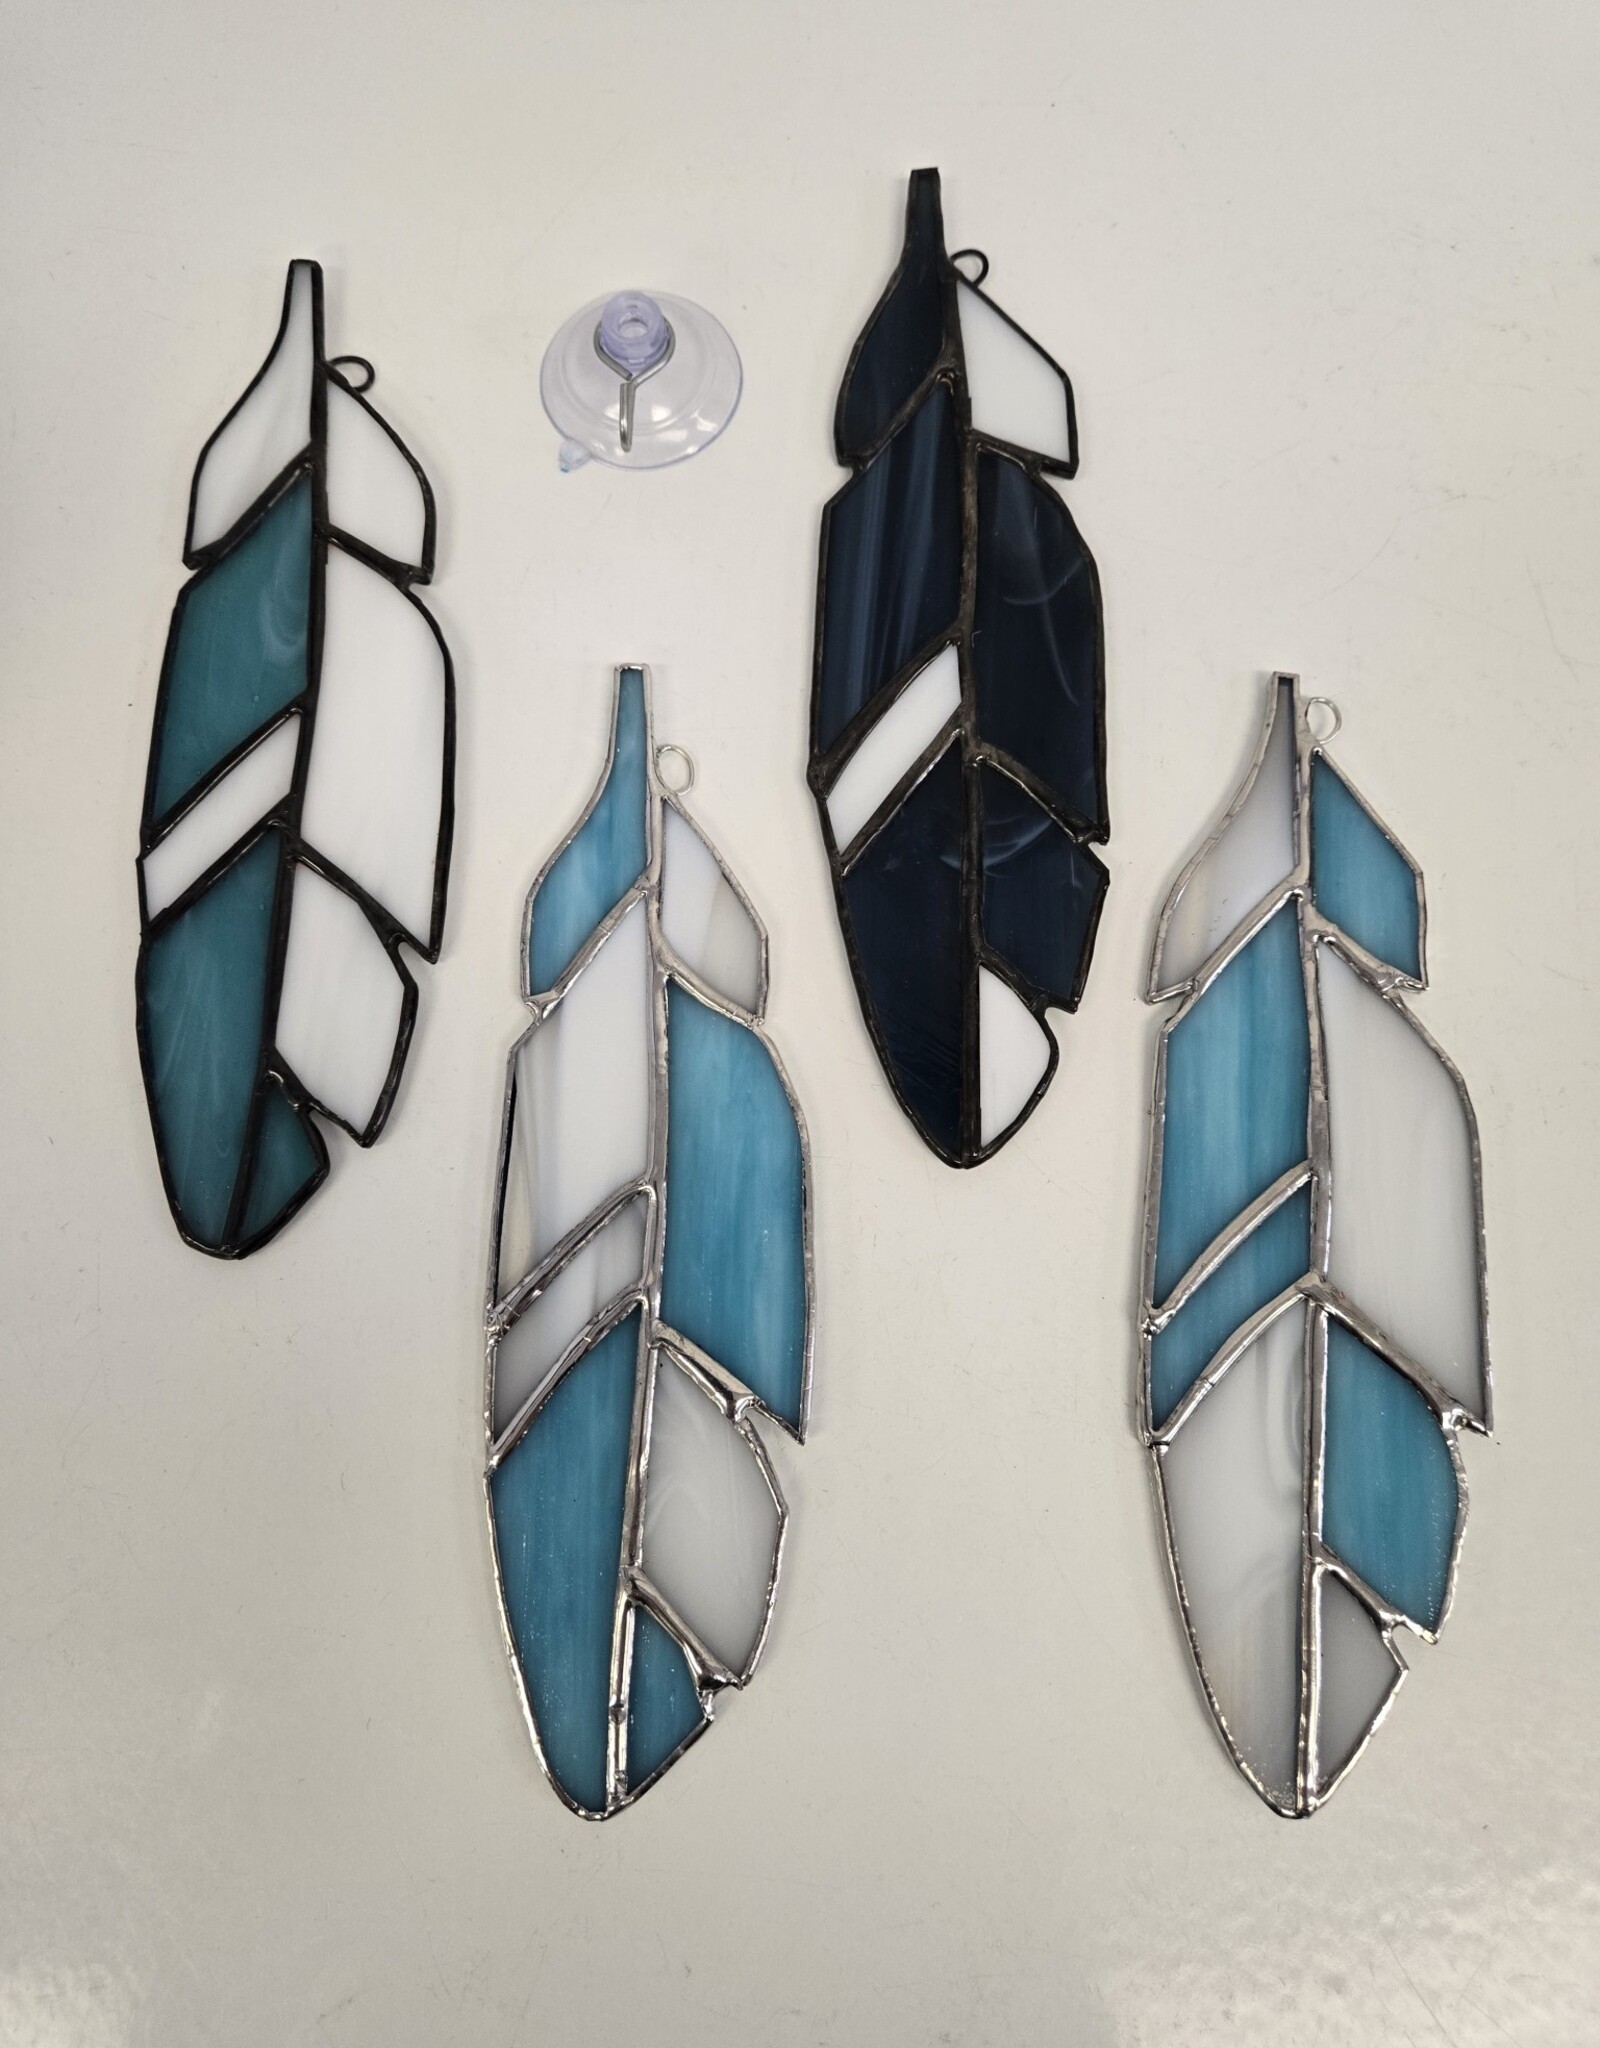 Stained Glass Feather Suncatcher - blue